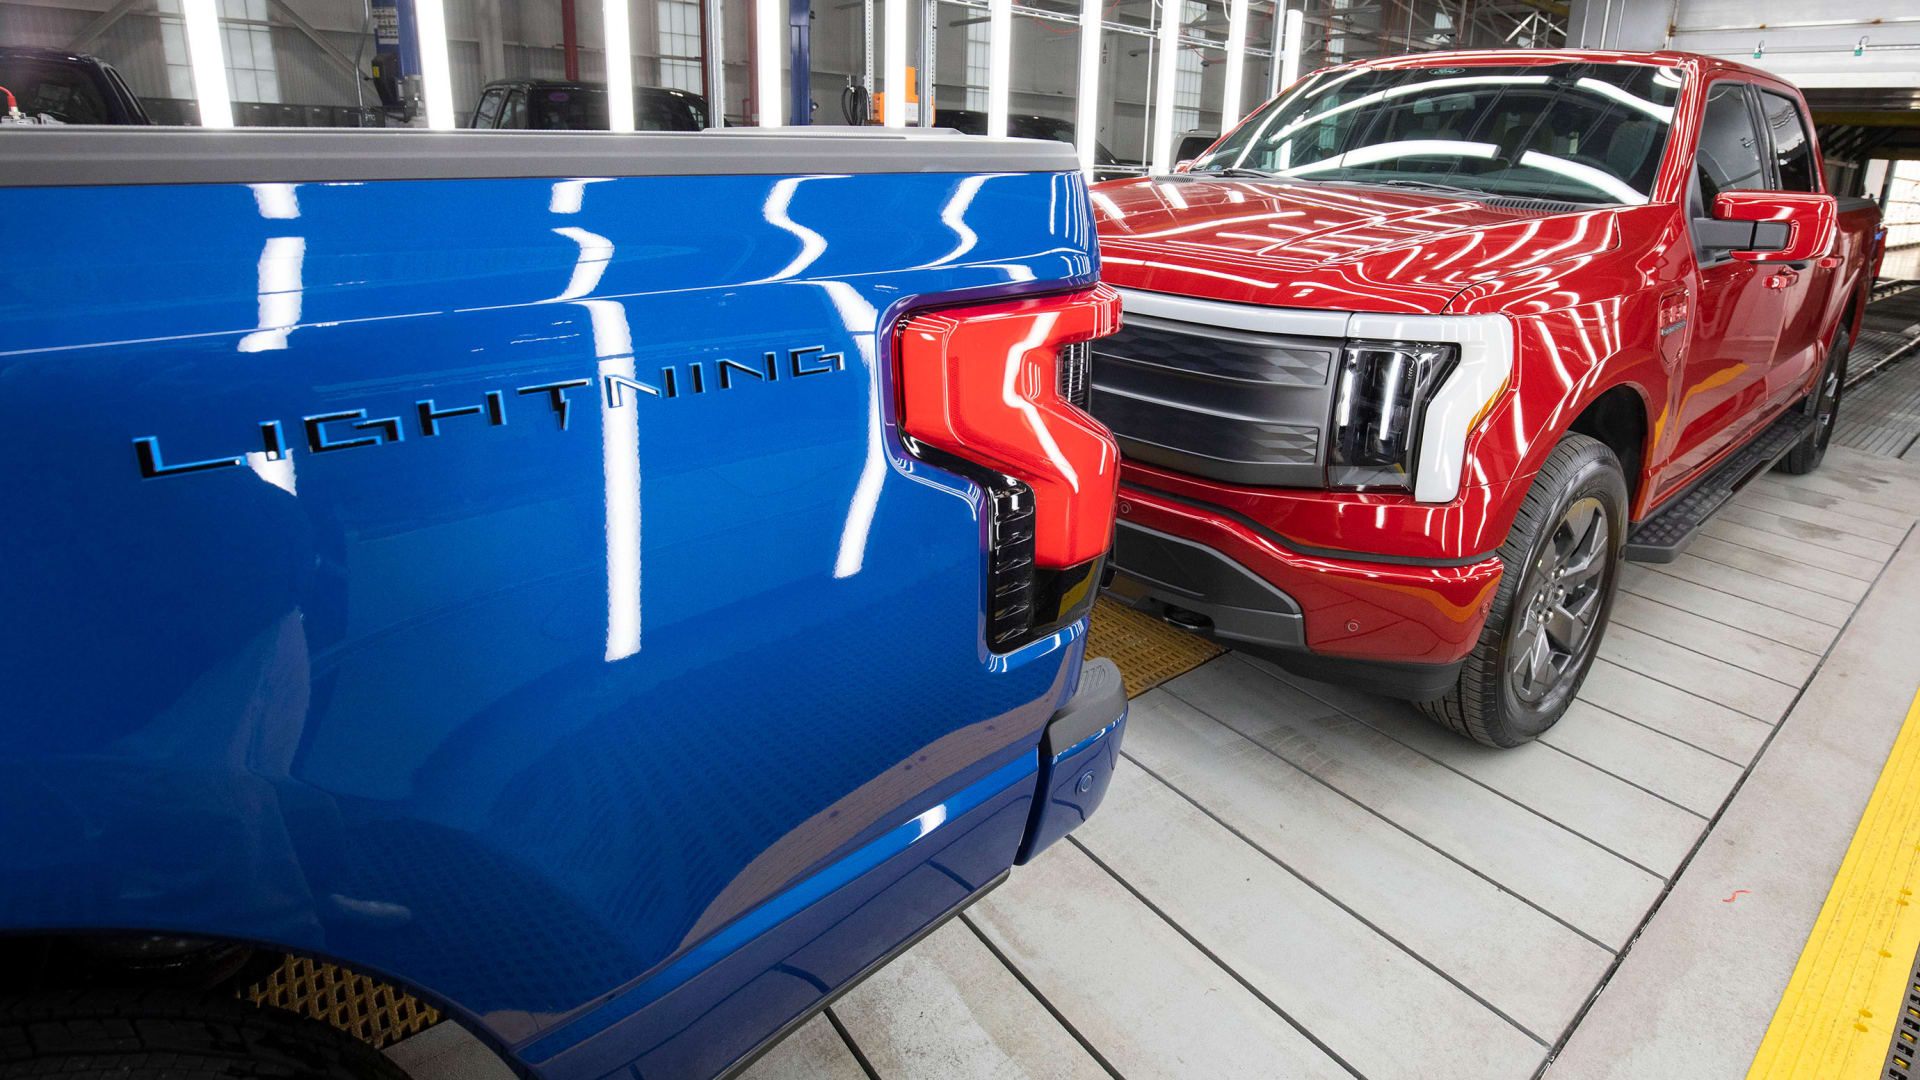 Ford F-150 Lightning trucks at the Ford Rouge Electric Vehicle Center in Dearborn, Michigan.